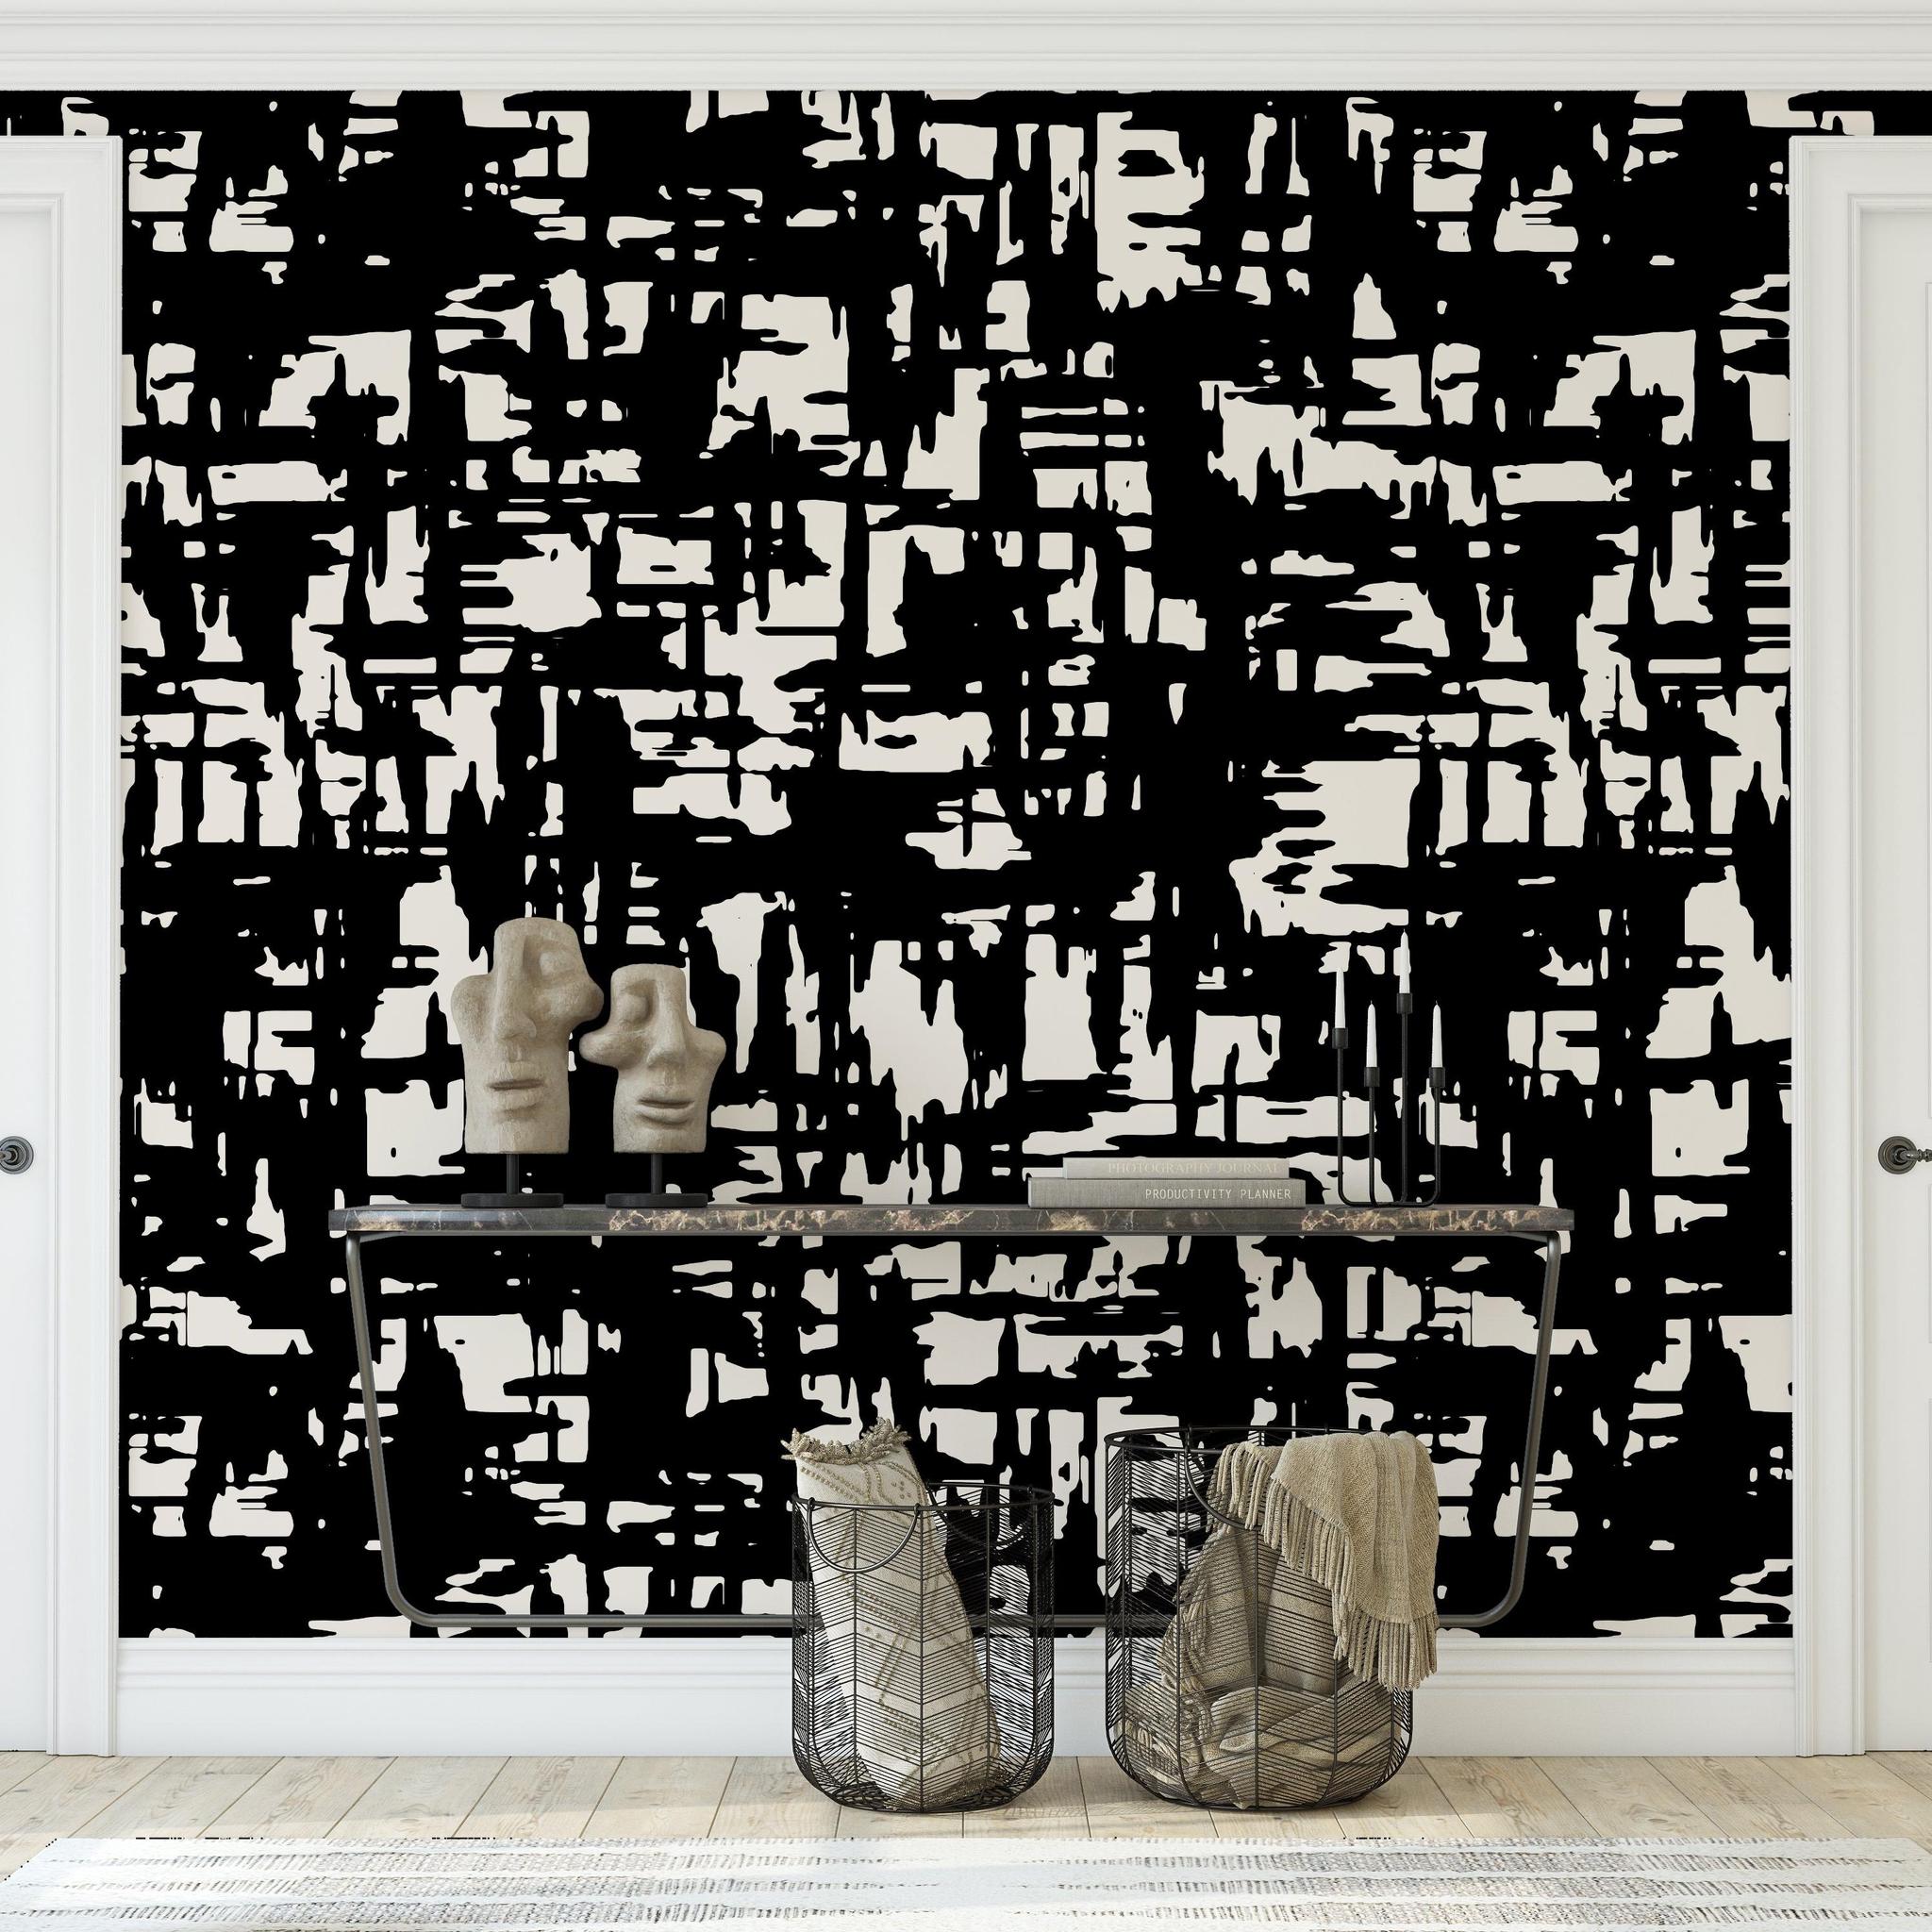 Mirage Wallpaper by The Stefanie Bloom Line, abstract design featured in modern living room setting.
